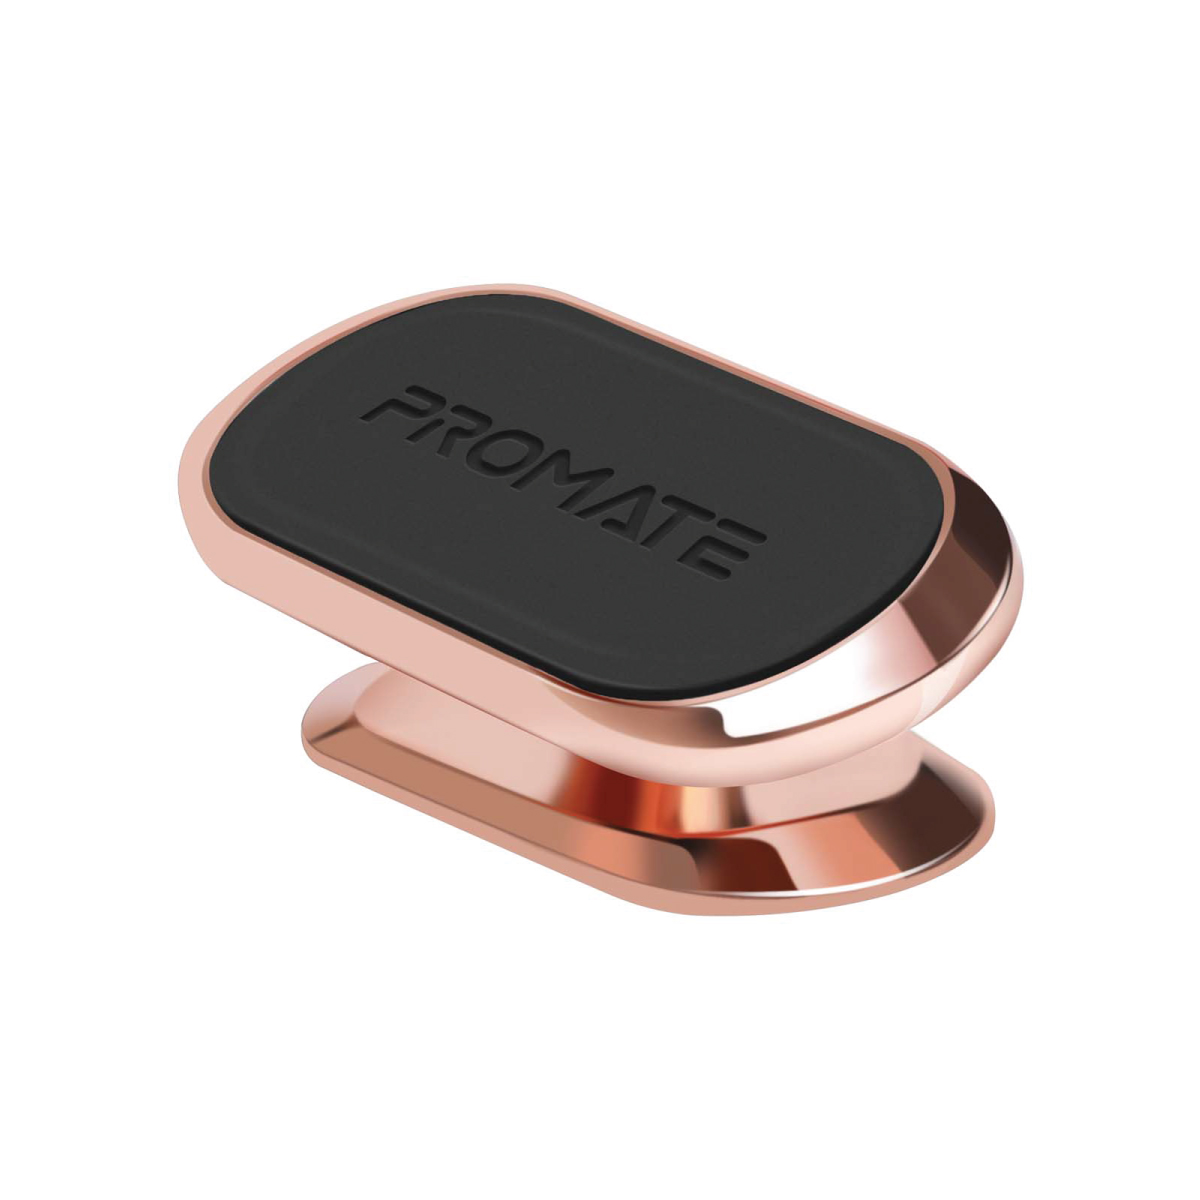 MAGNETTO-3 ROSEGOLD 360o Cradle-Free Magnetic AC Vent Mount